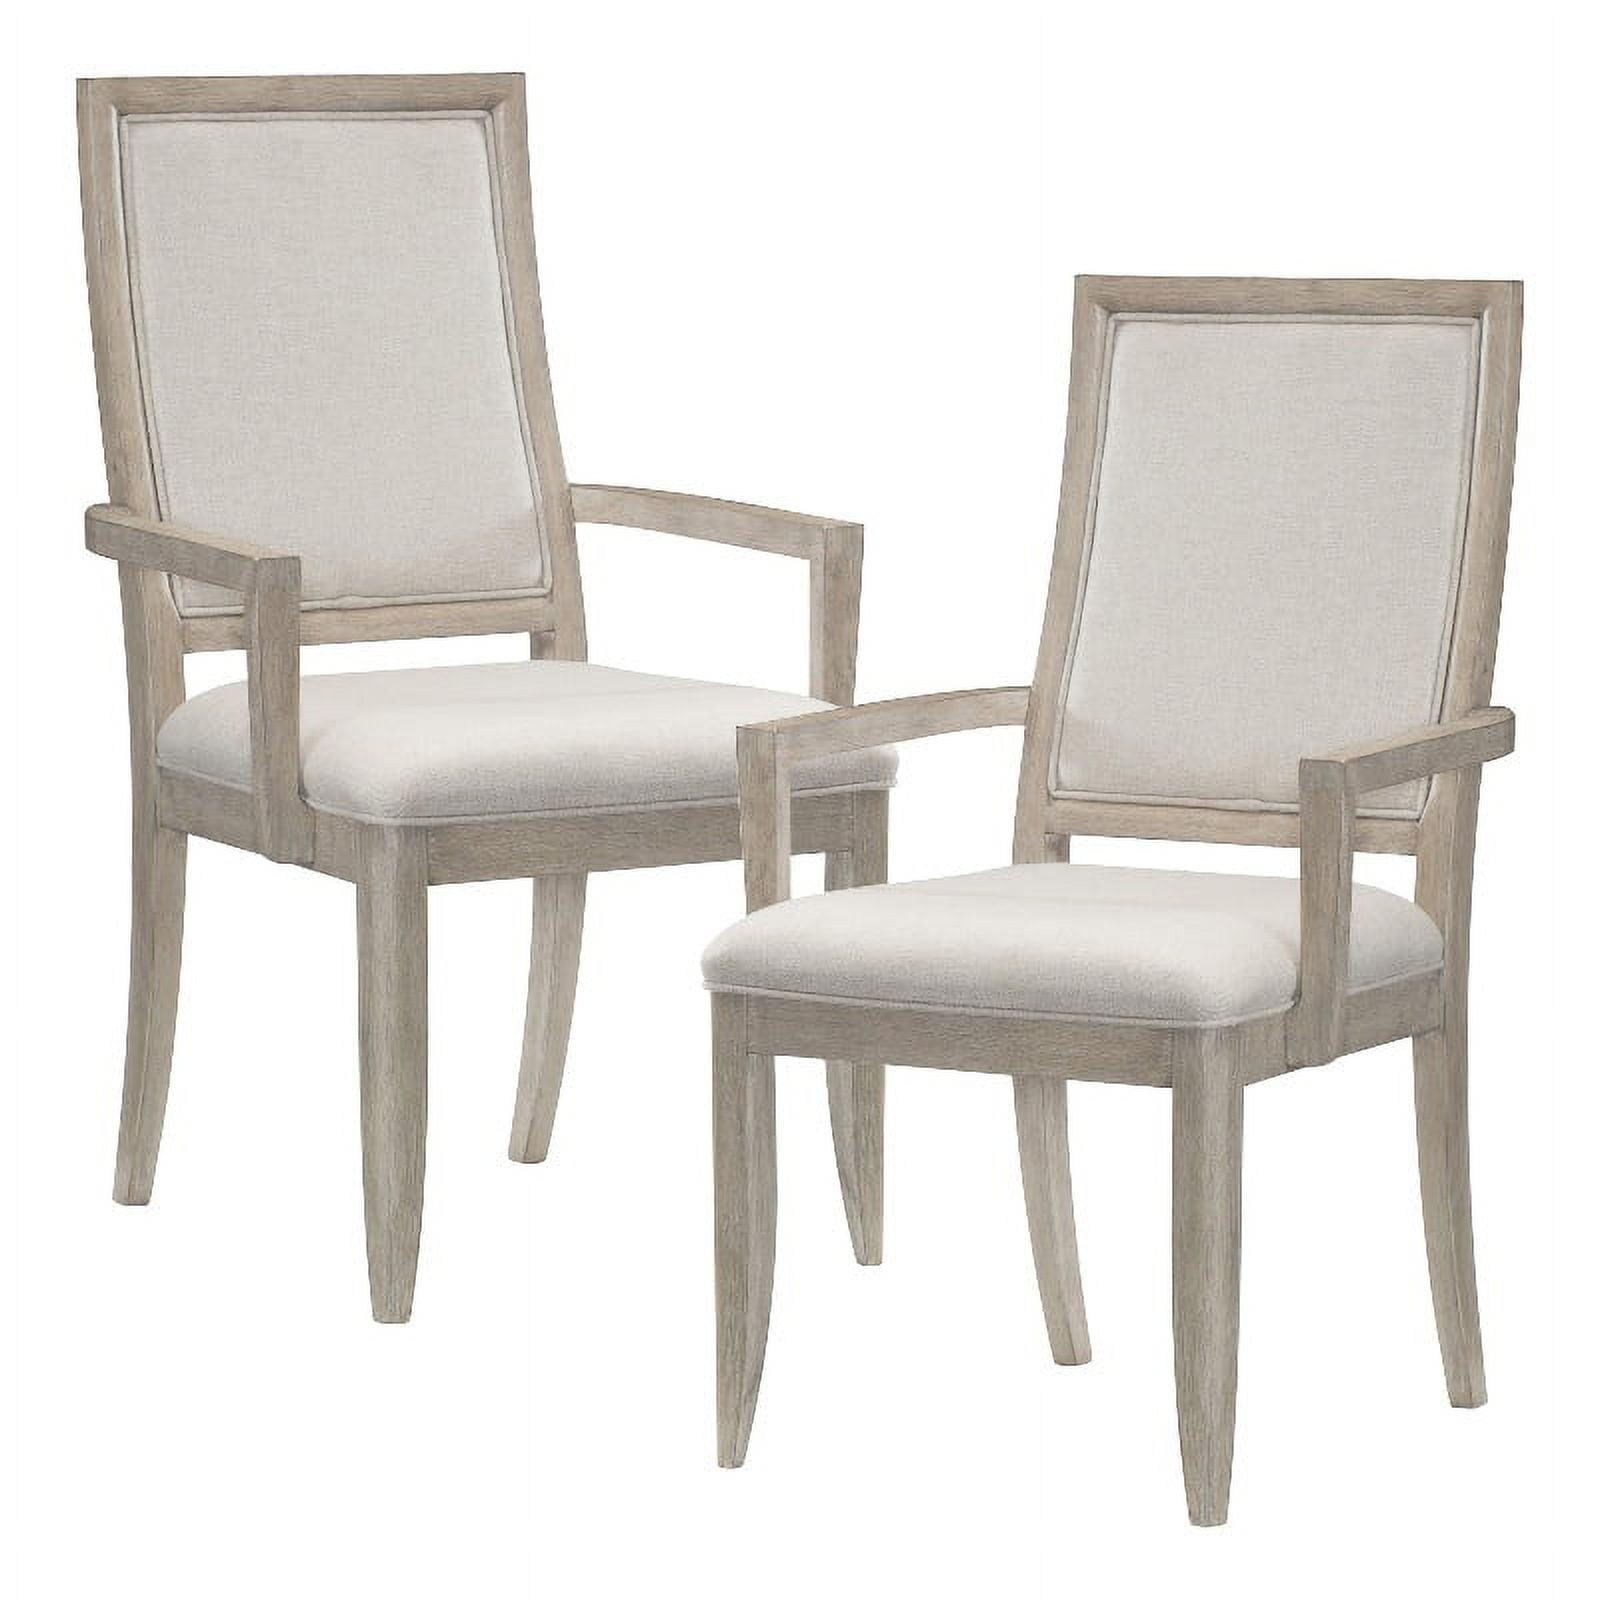 Elegant Gray Upholstered Wood Arm Chair for Dining Room